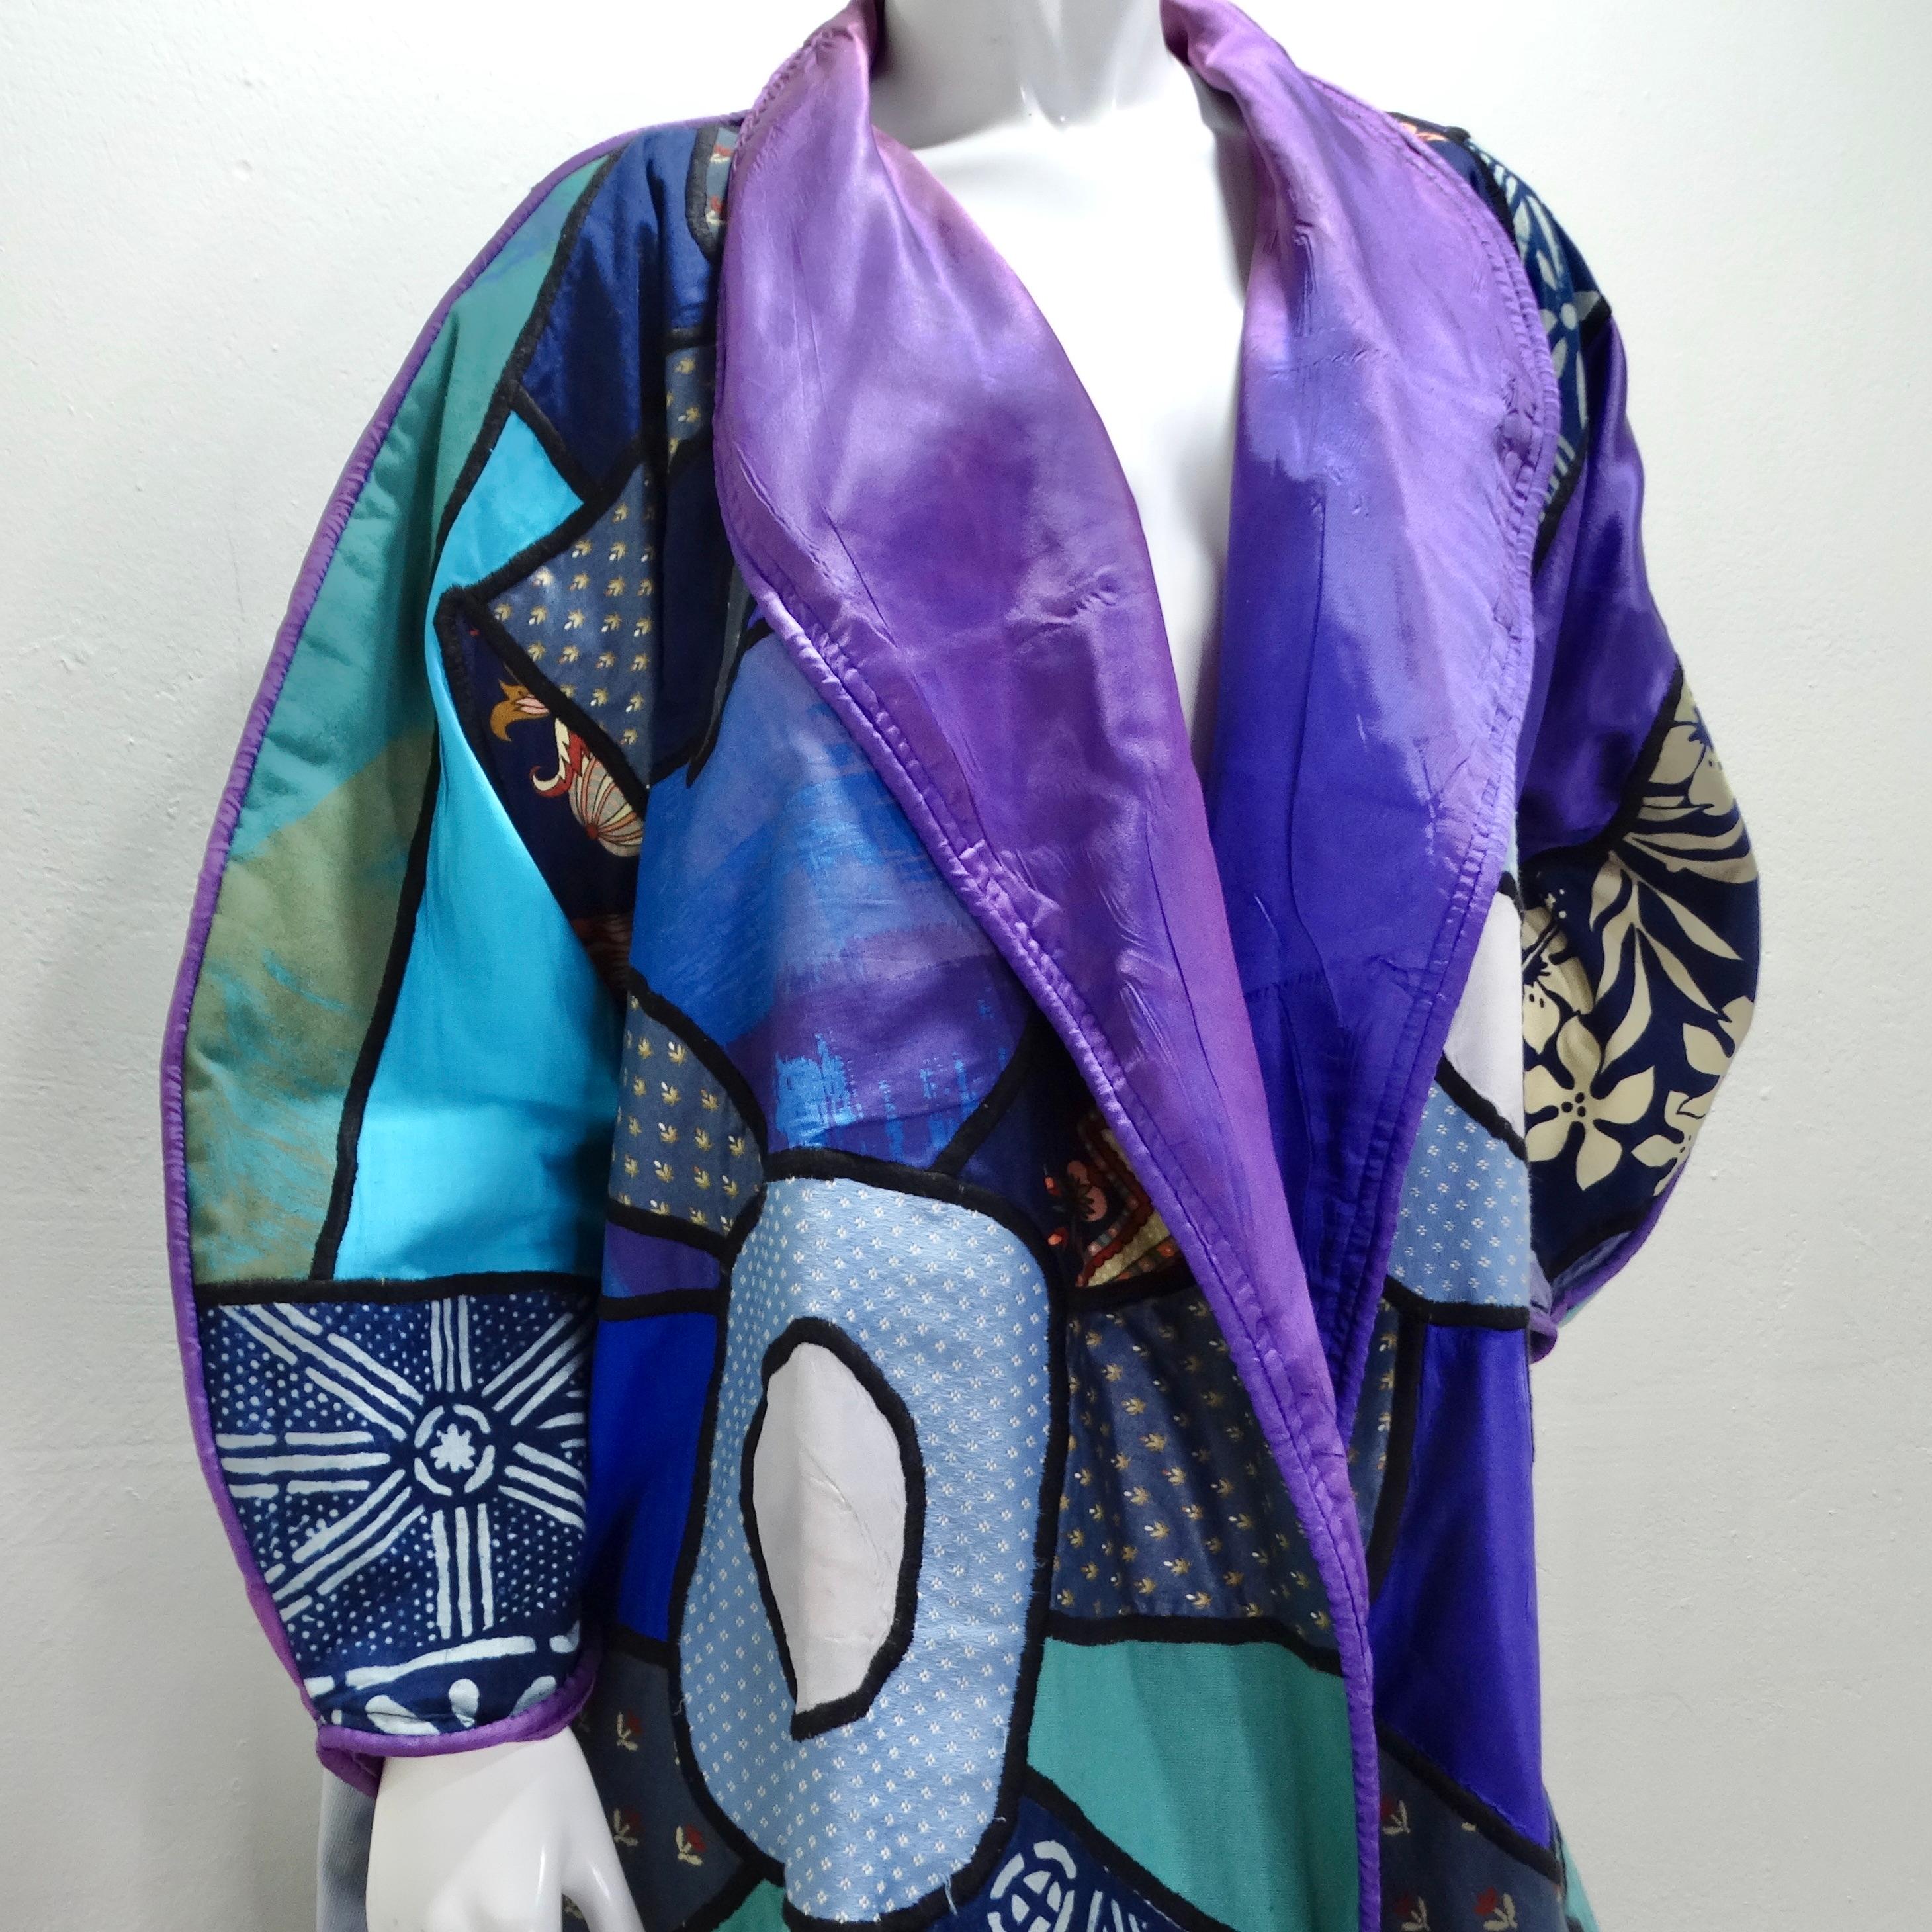 Introducing the 1980s La Colección Judith Roberts Patchwork Coat, a stunning and vibrant statement piece that beautifully combines an eclectic mix of fabrics and textures. This long coat showcases a multicolor patchwork design, incorporating a